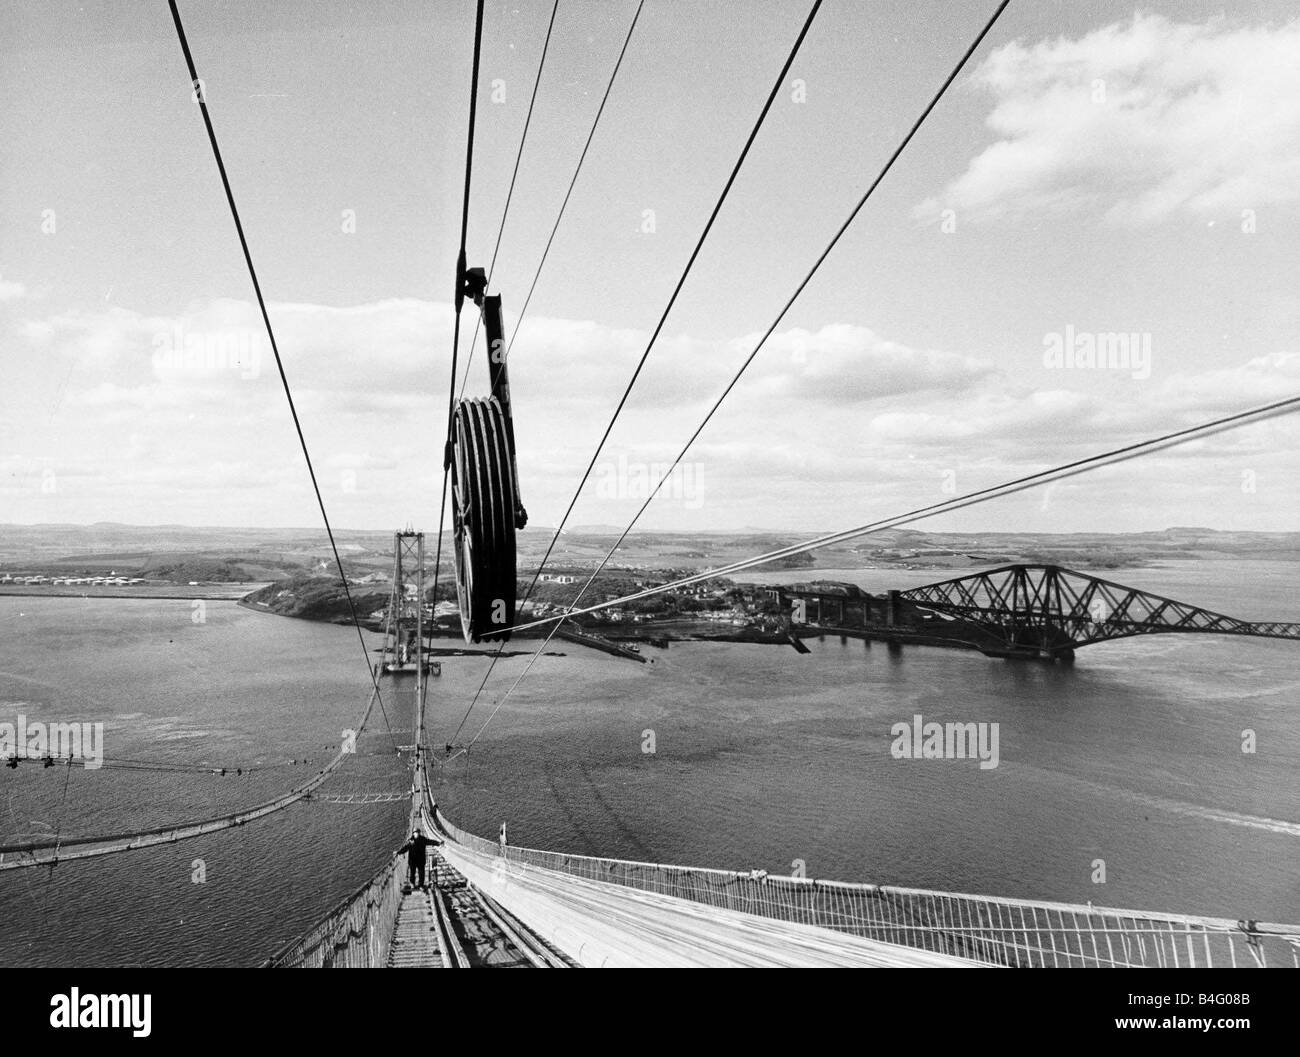 Forth Road Bridge construction June 1962 Wires being strung across the Forth as workman walking on boarding with the Forth Railway Bridge in background Stock Photo